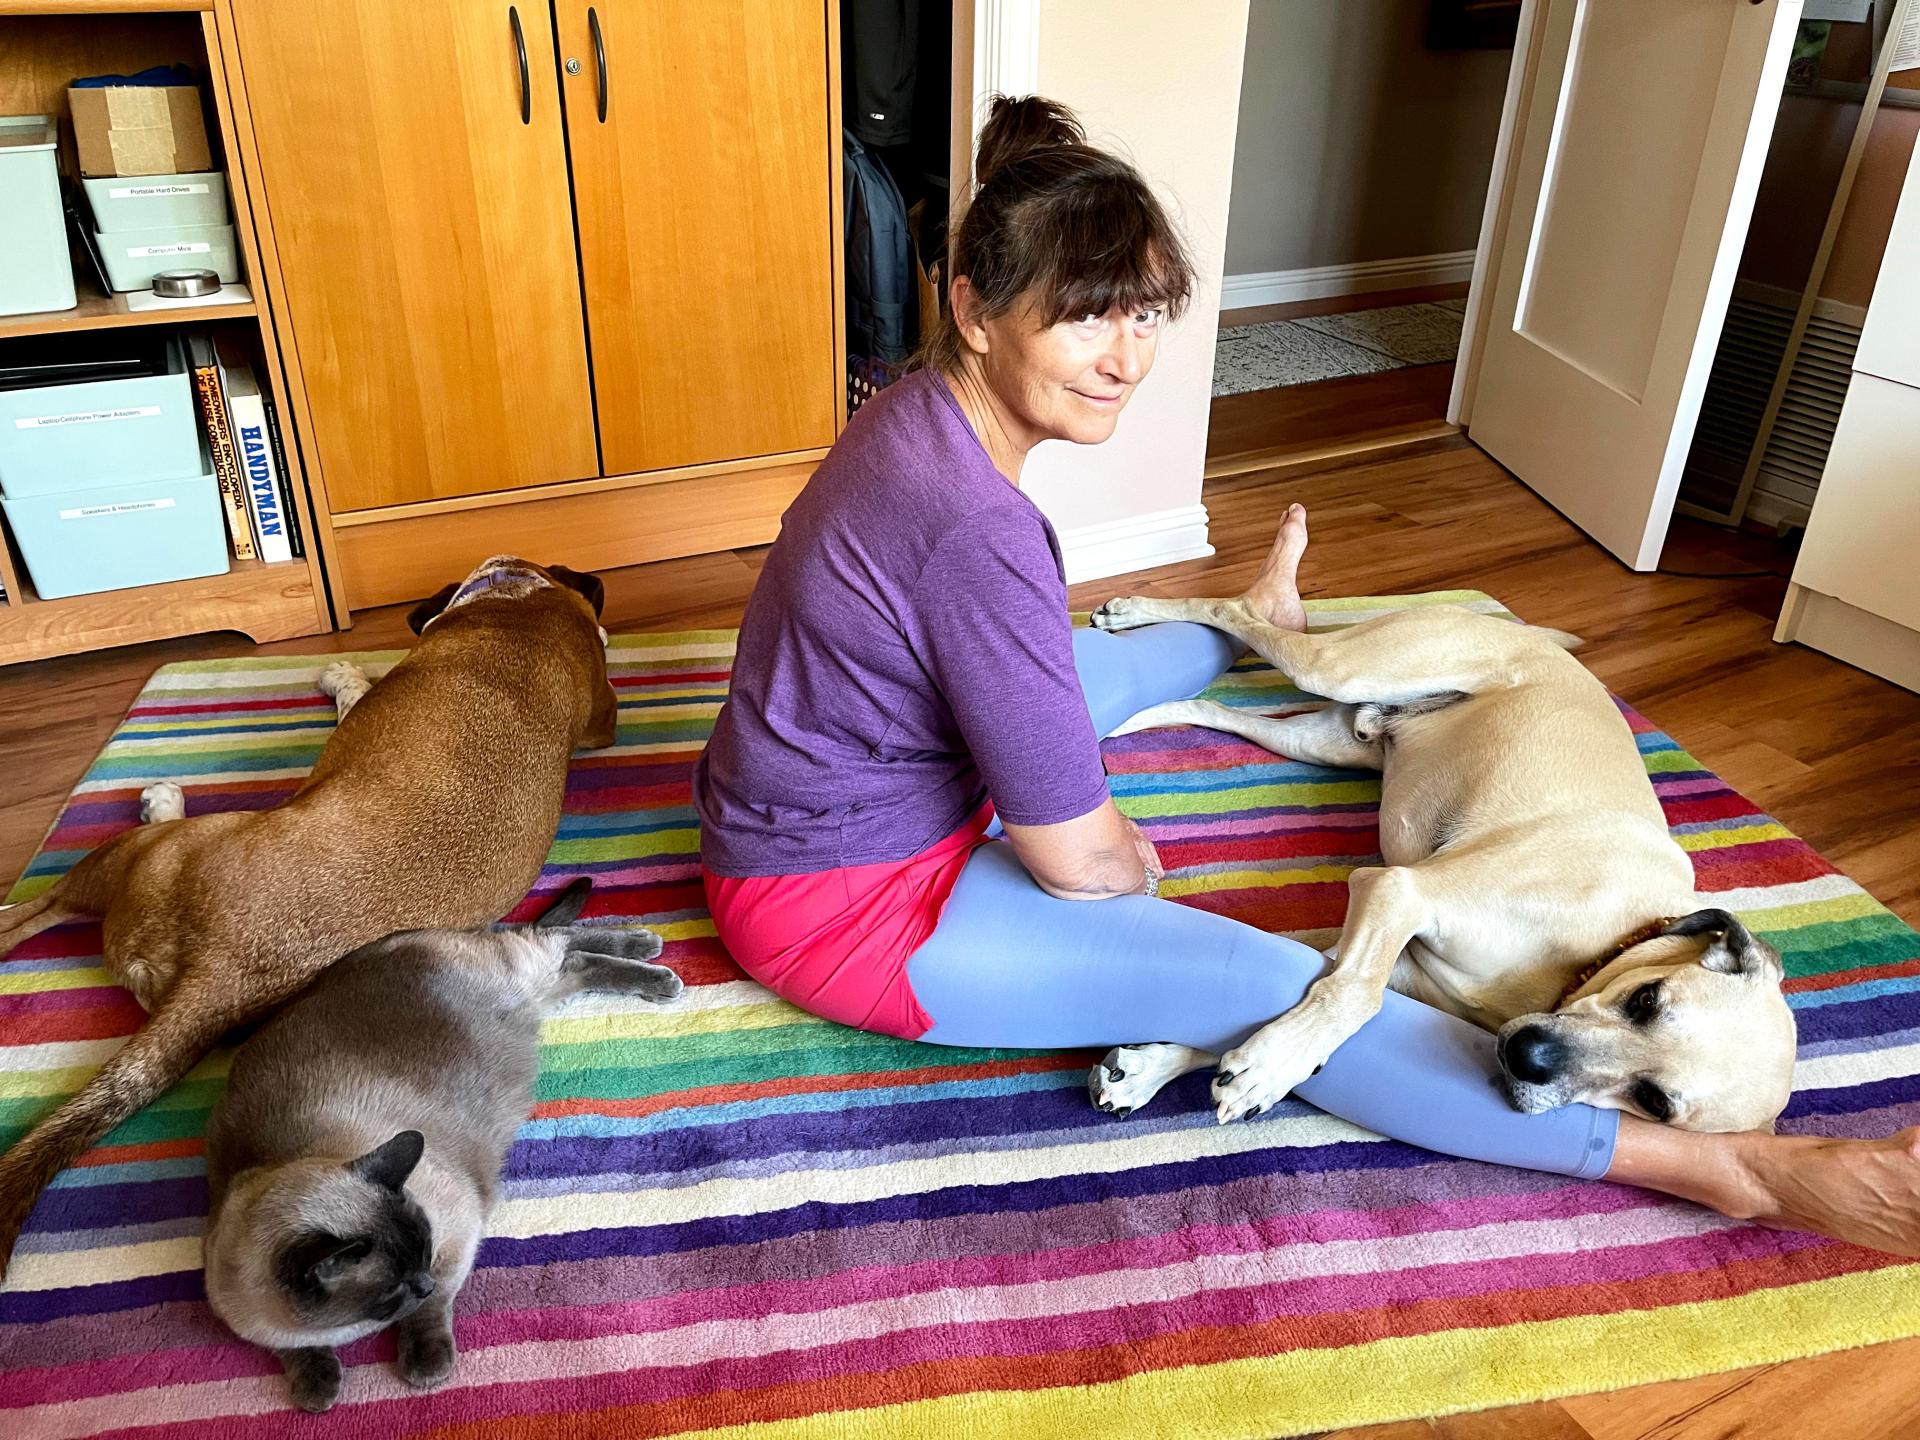 Nancy with Yogi and Tank the dogs and Pong the cat on a colorful blanket on the floor